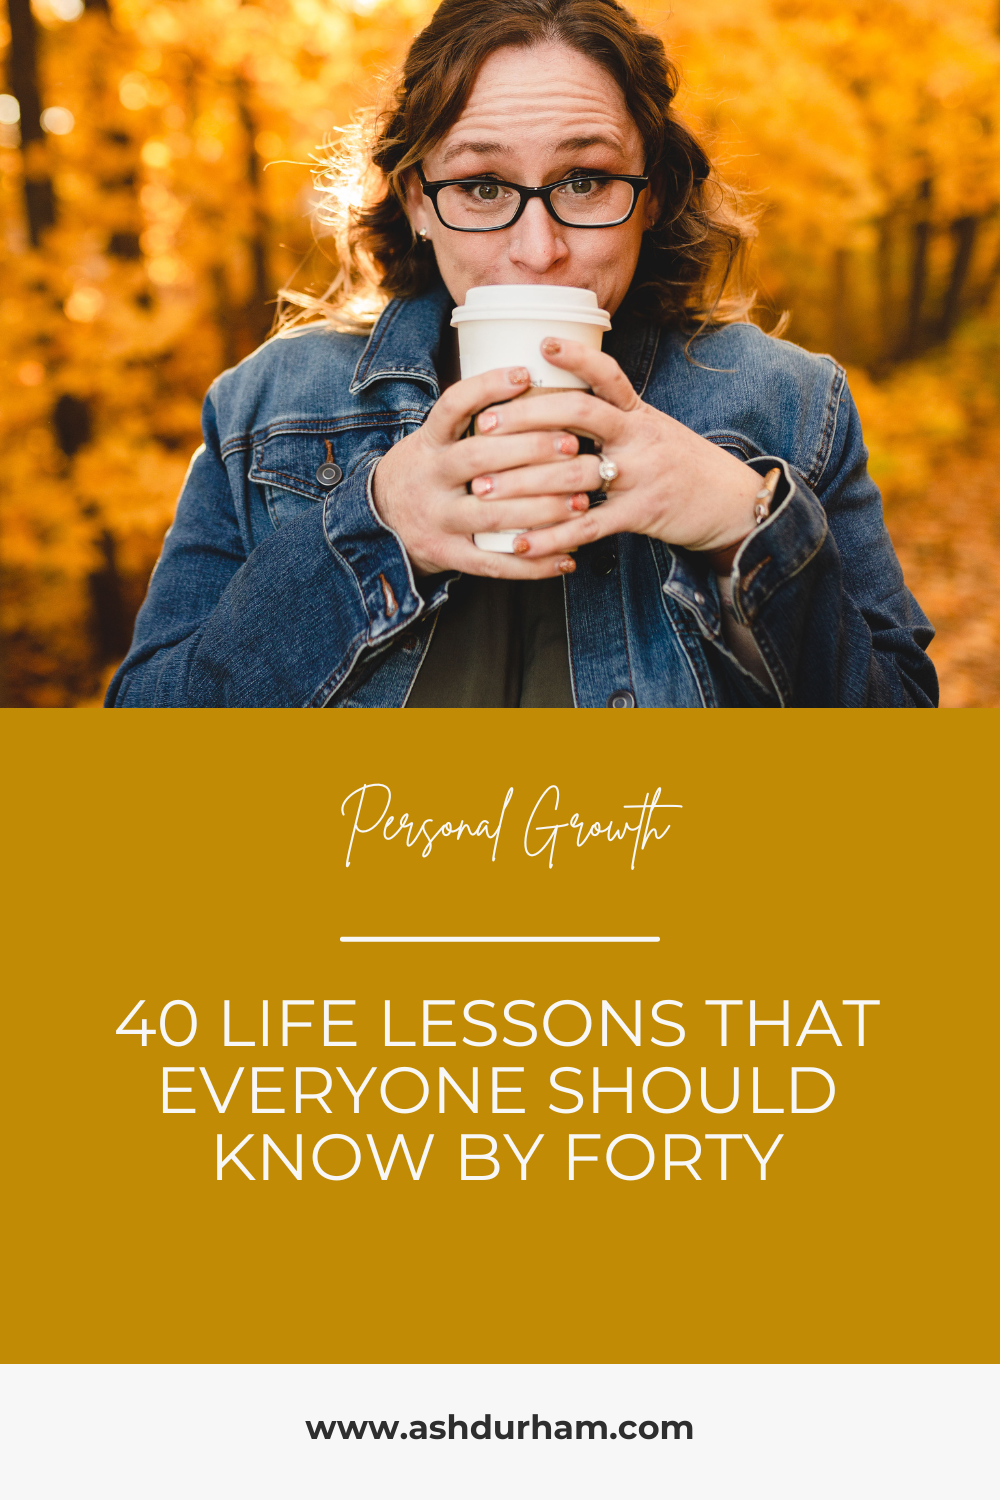 40 life lessons that everyone should know by forty